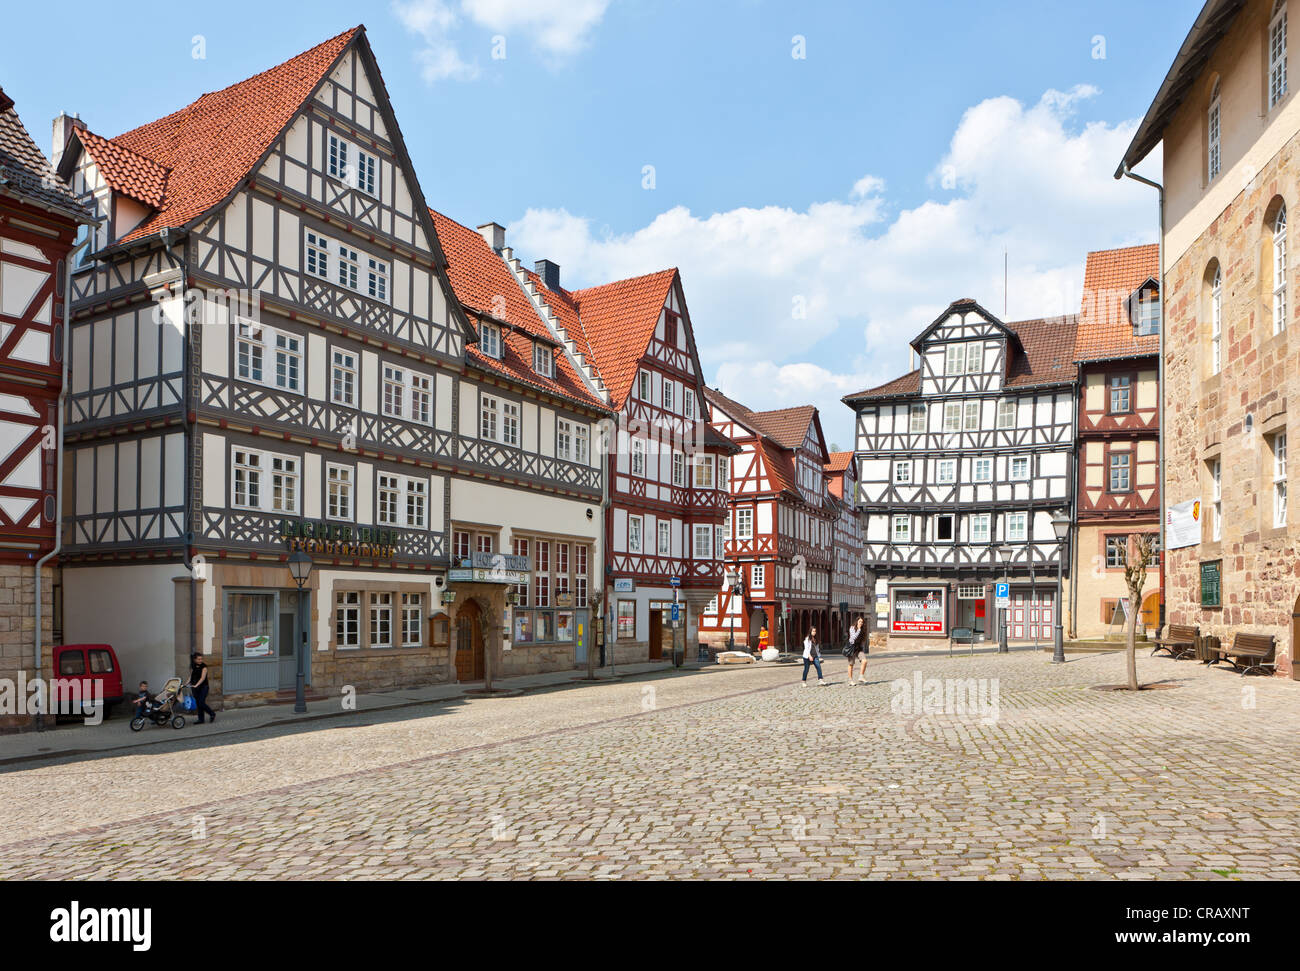 Medieval town with half-timbered buildings, Spangenberg, Schwalm Eder district, Hesse, Germany, Europe, PublicGround Stock Photo